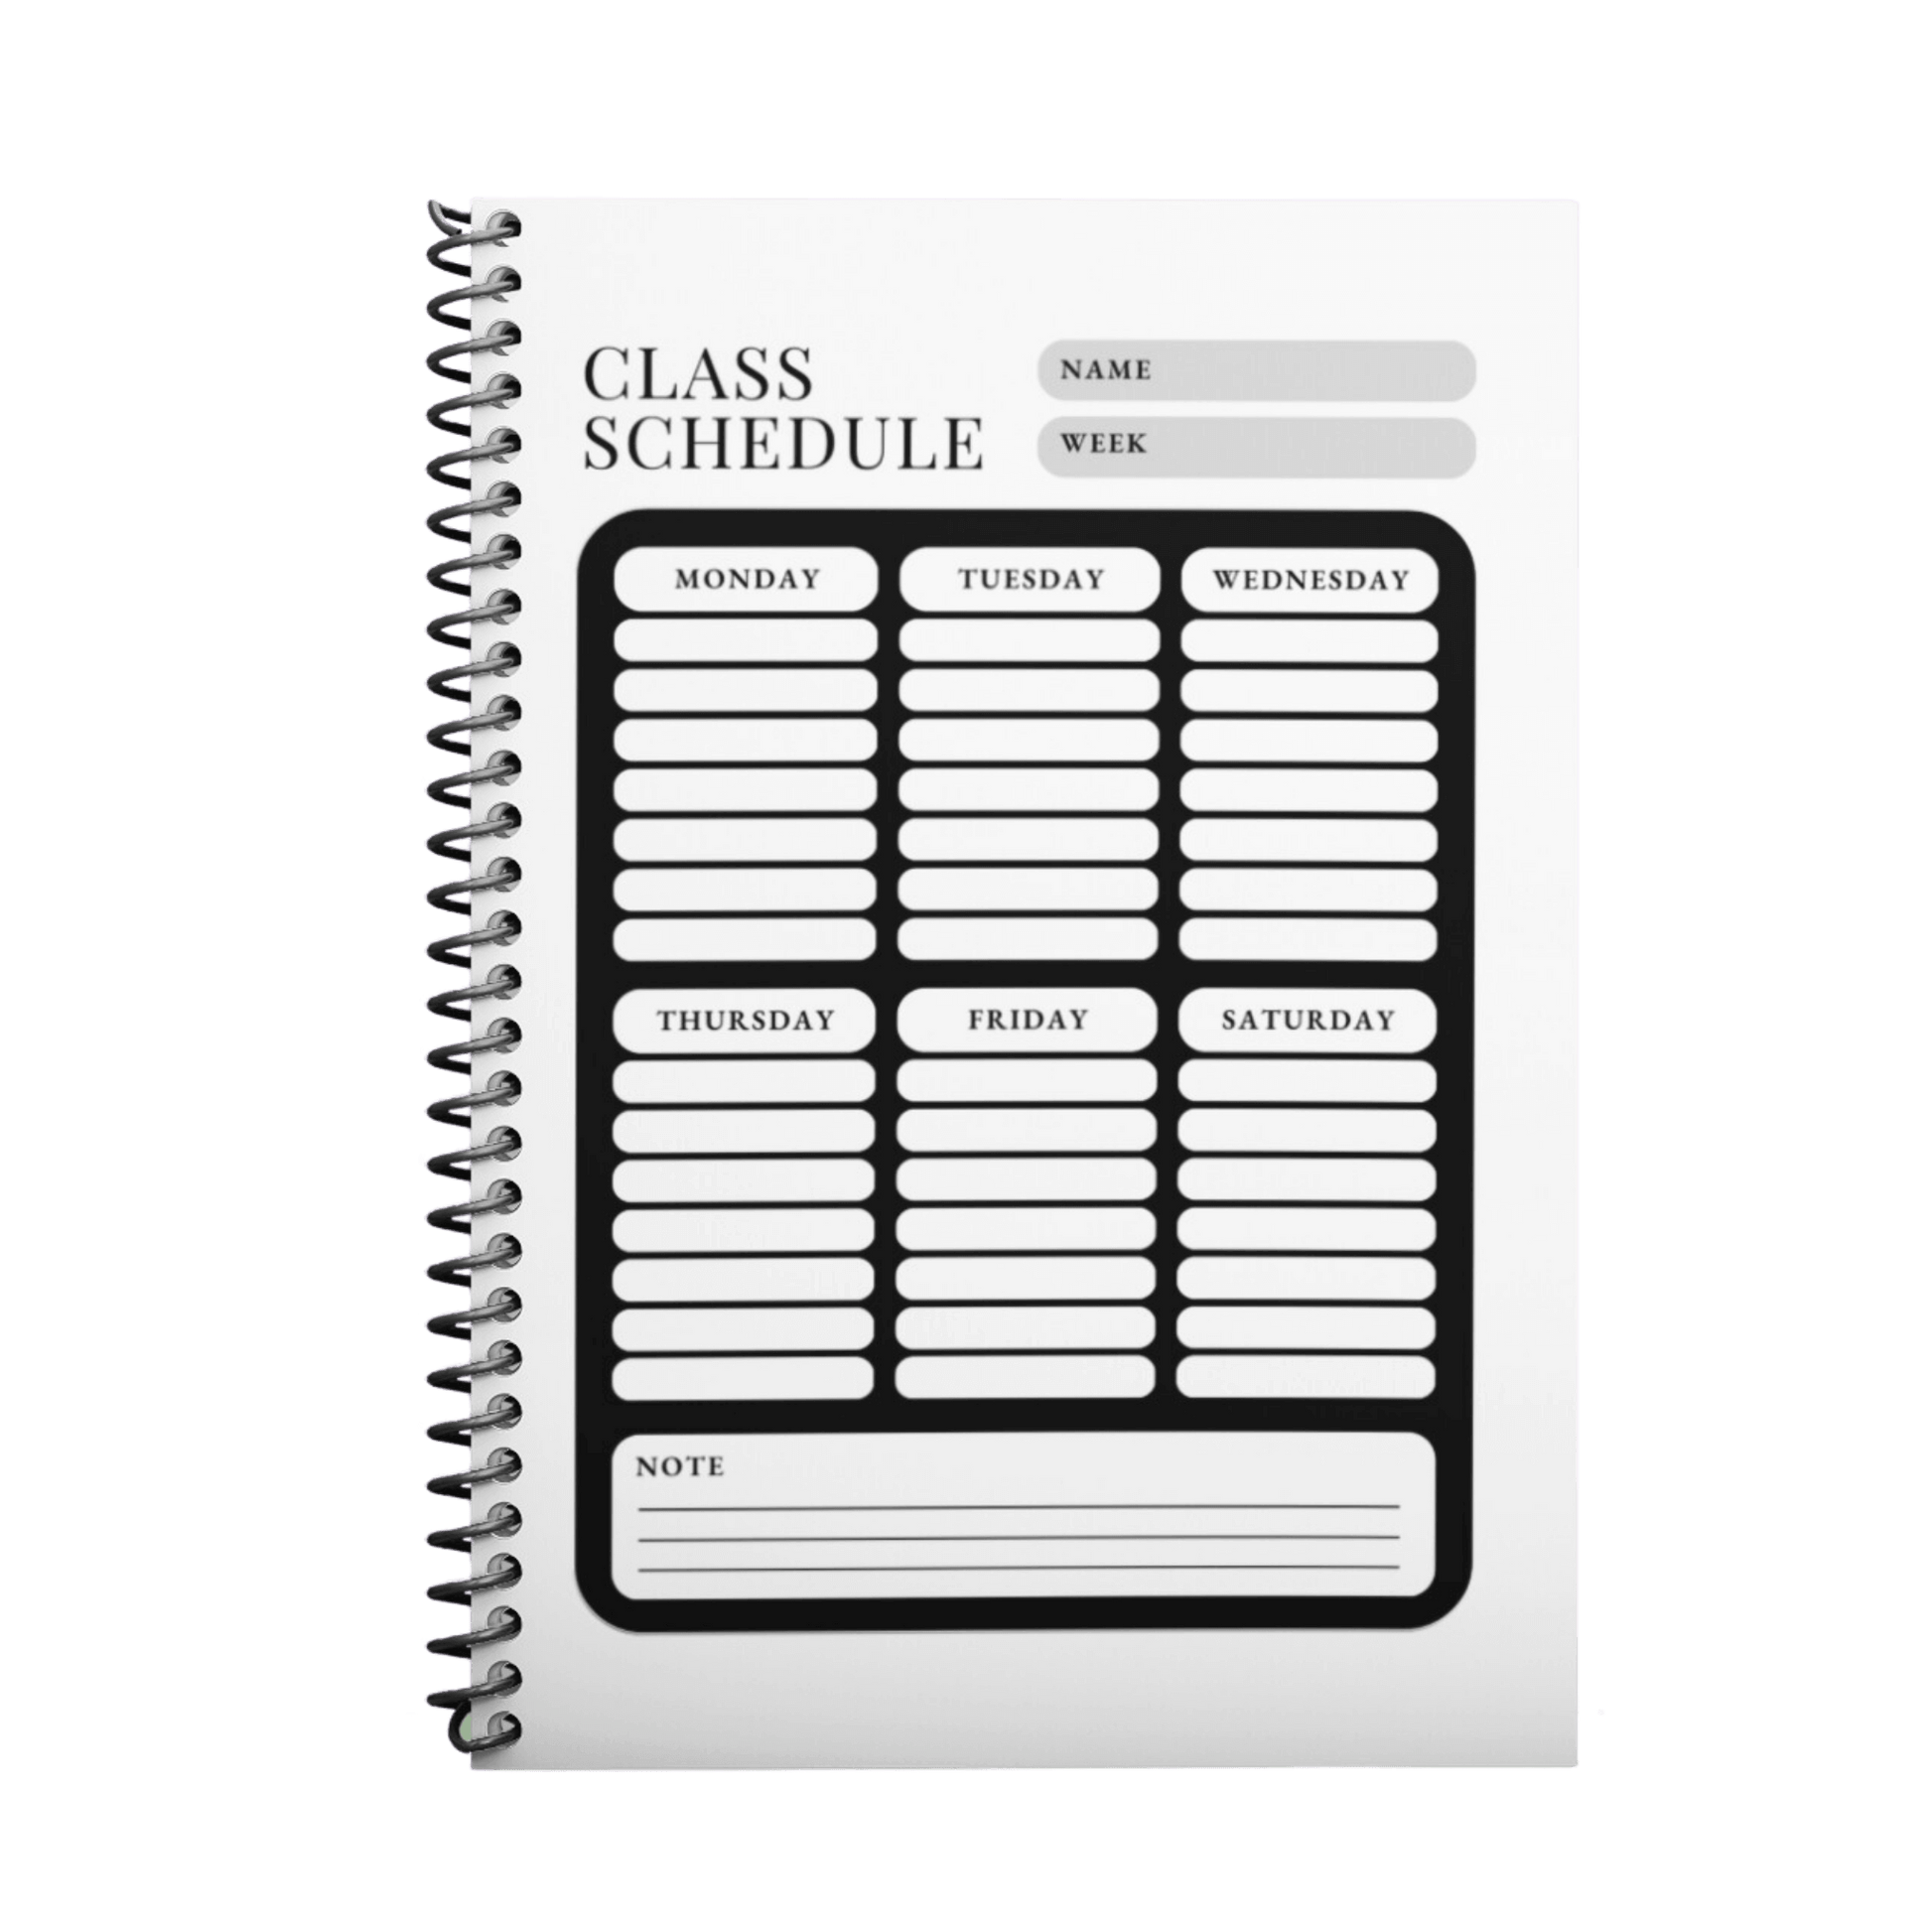 Image of Mindful Student Homework Tracker from Mindful Organizer selling for $19.00